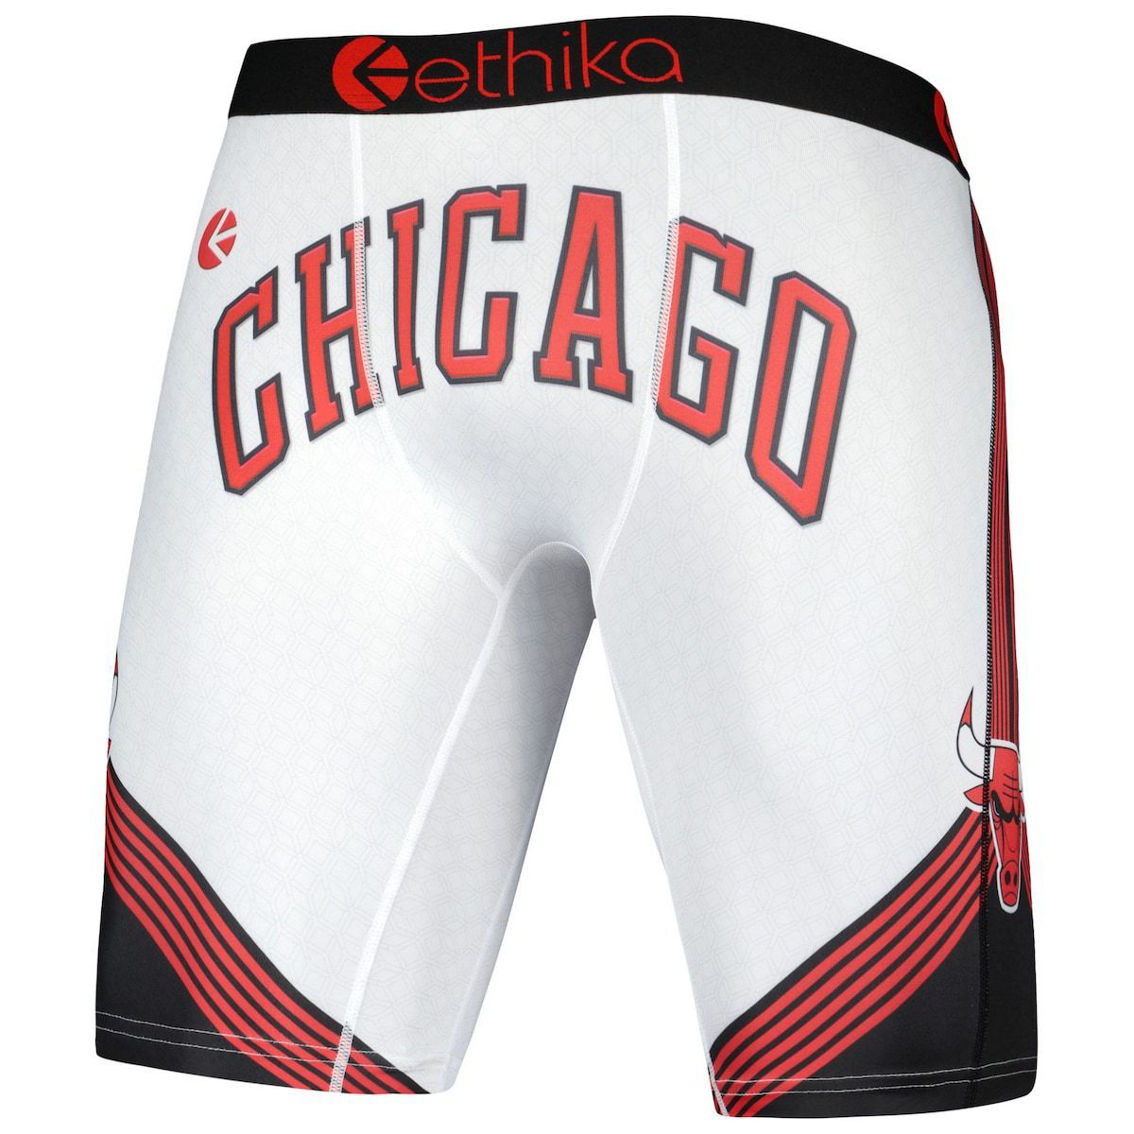 Ethika Men's Red Chicago Bulls City Edition Boxer Briefs - Image 3 of 4